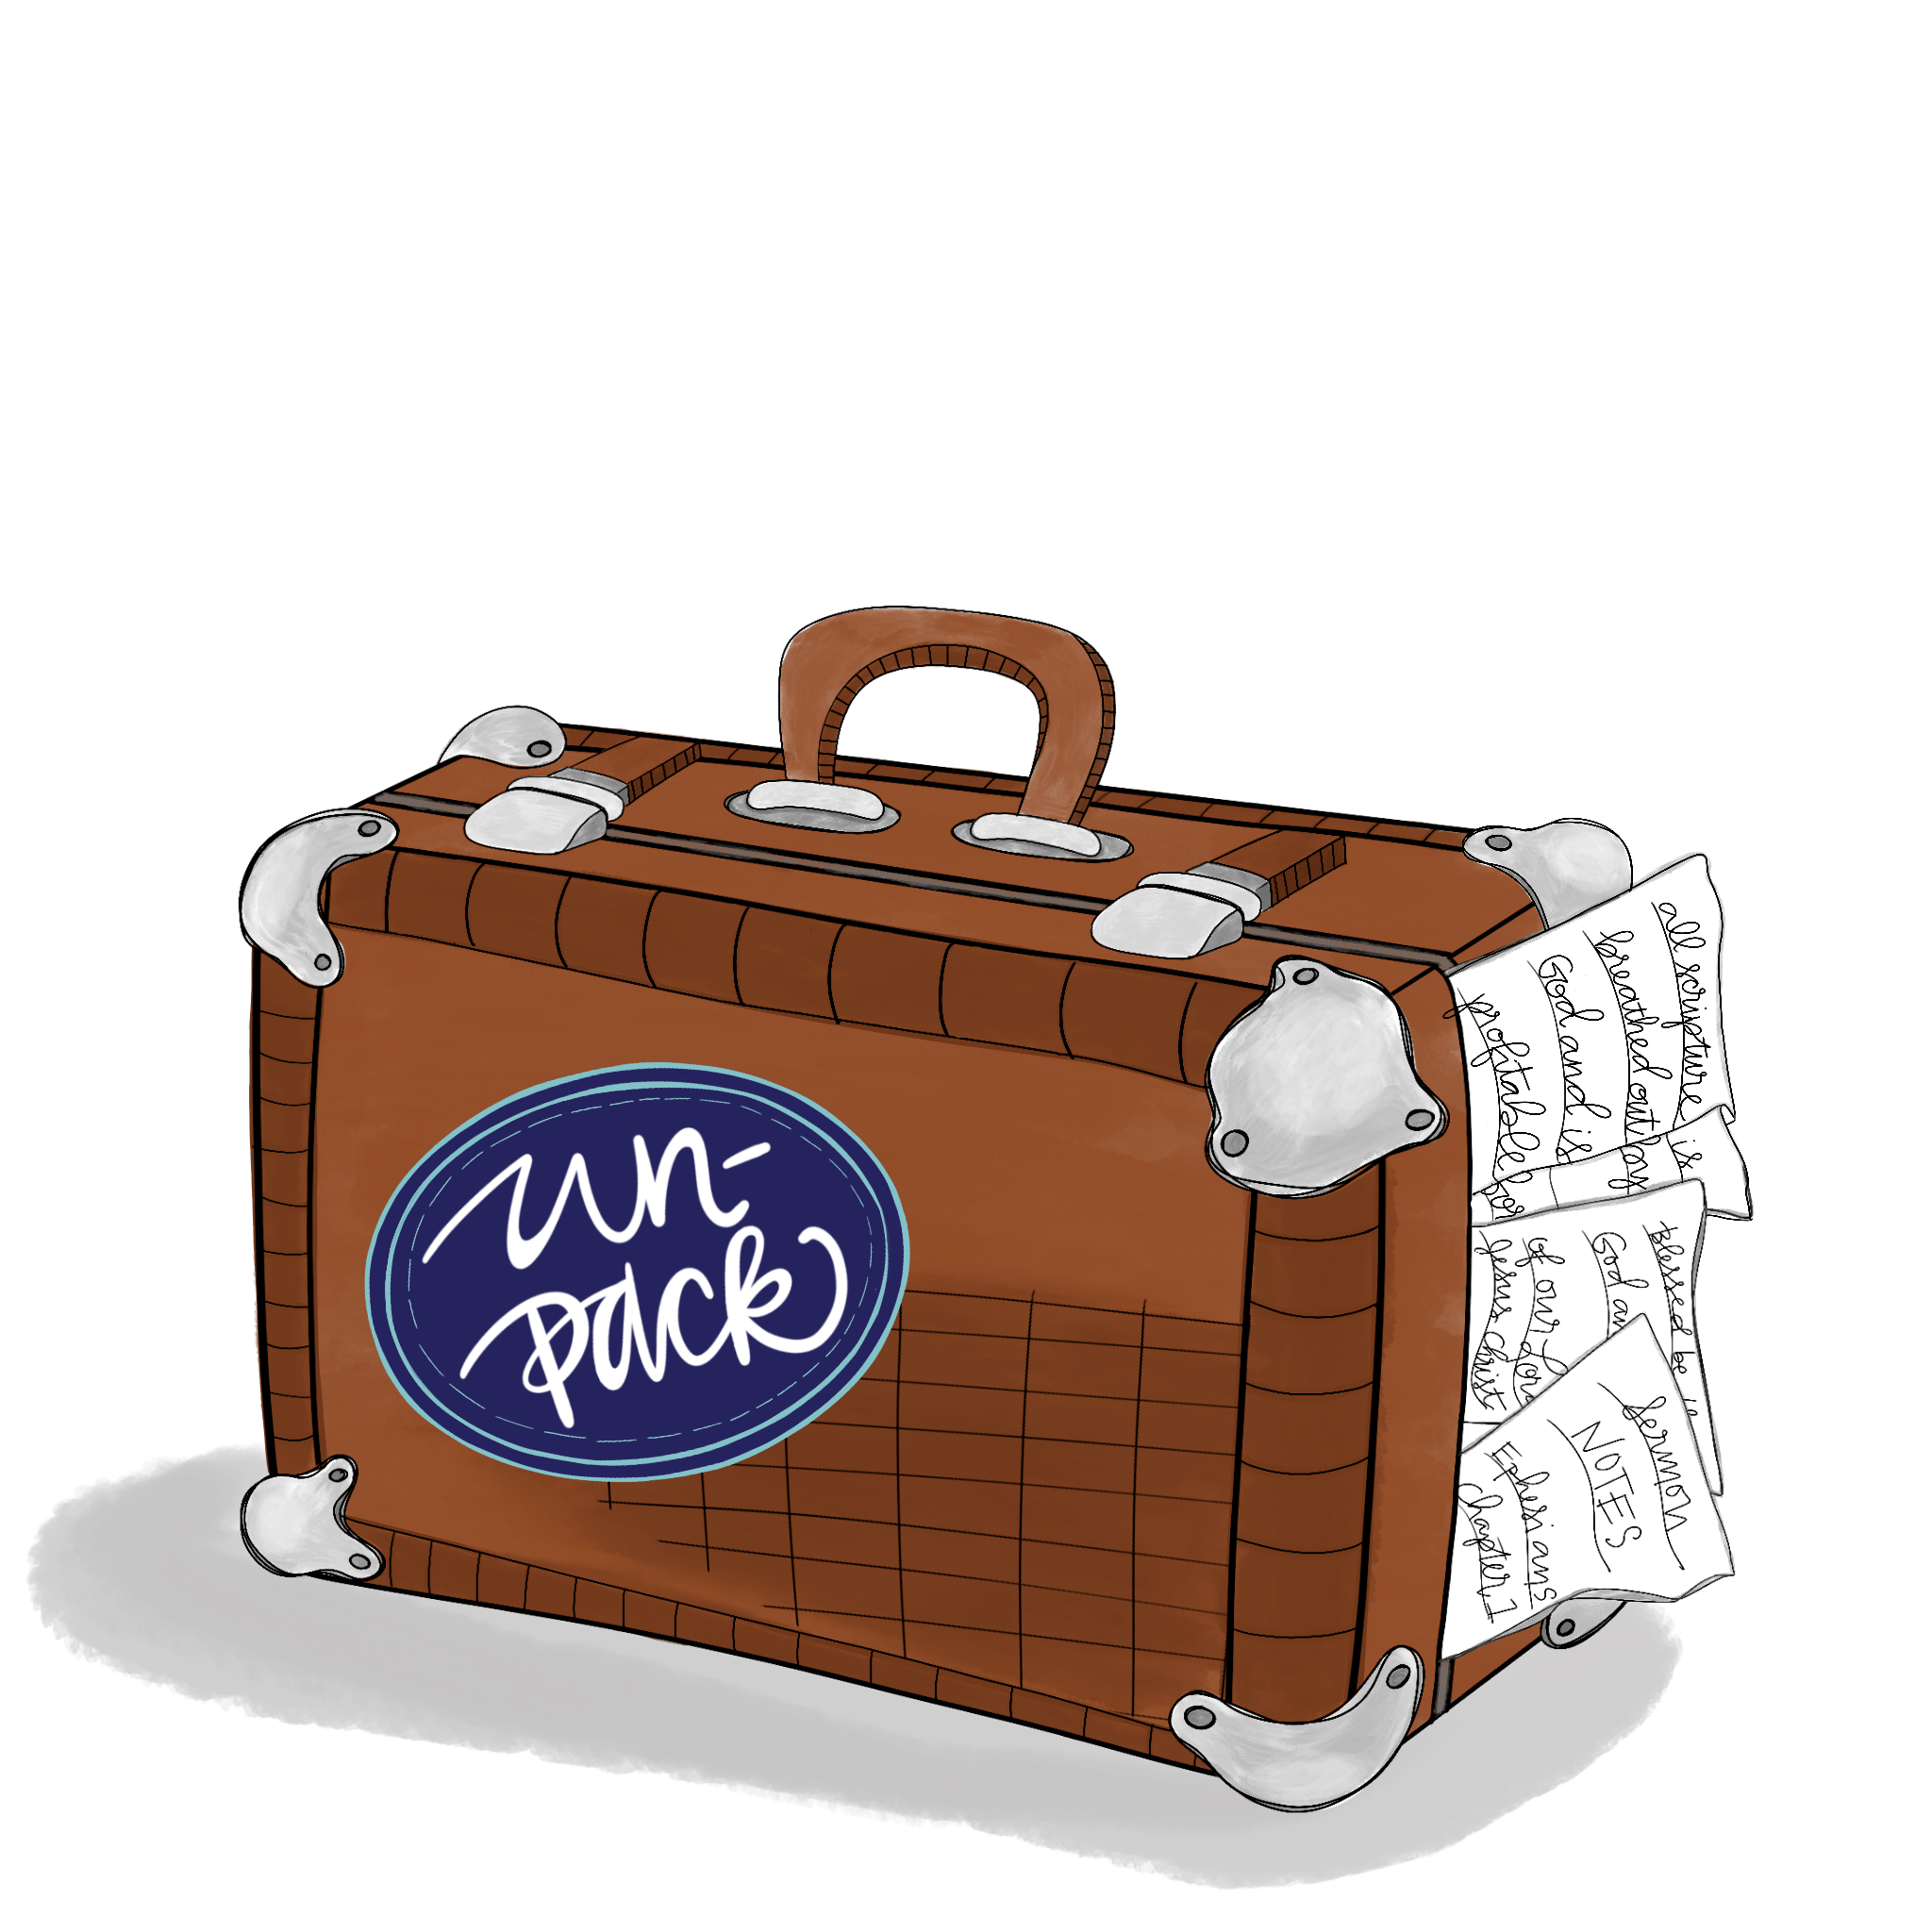 traveling clipart doodle